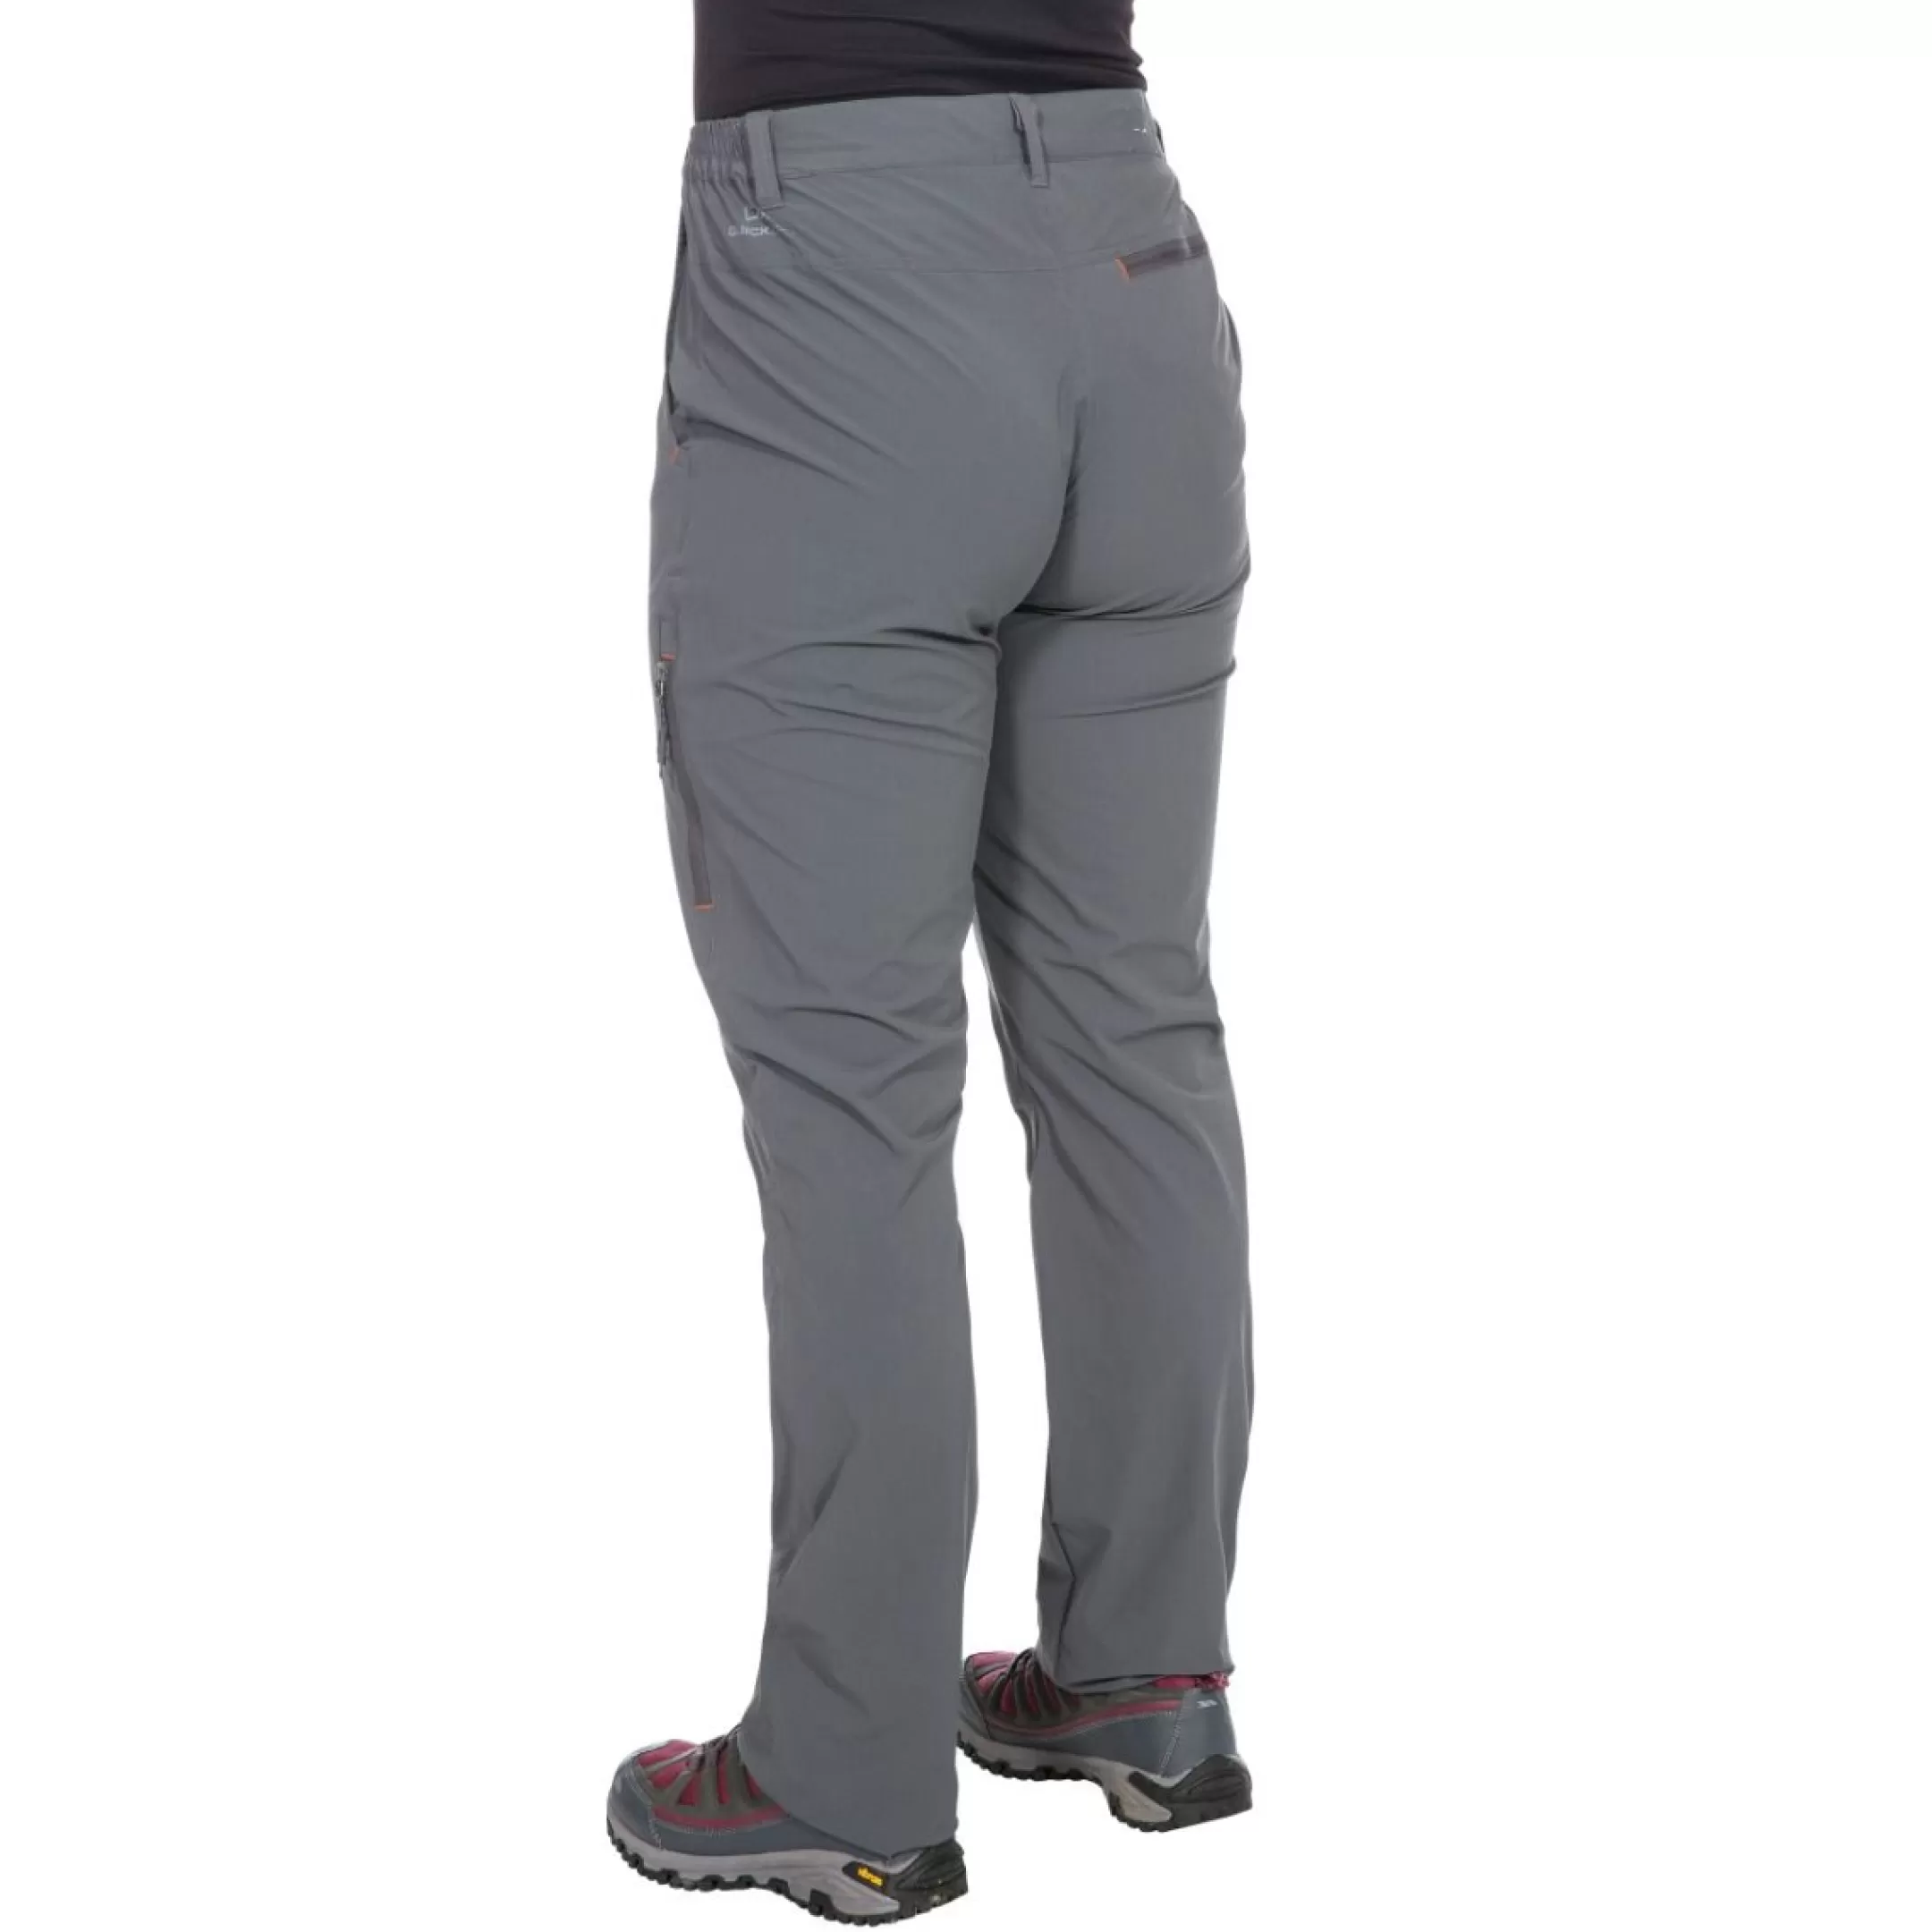 Womens Quick Dry Walking Trousers Pasture | Trespass Cheap